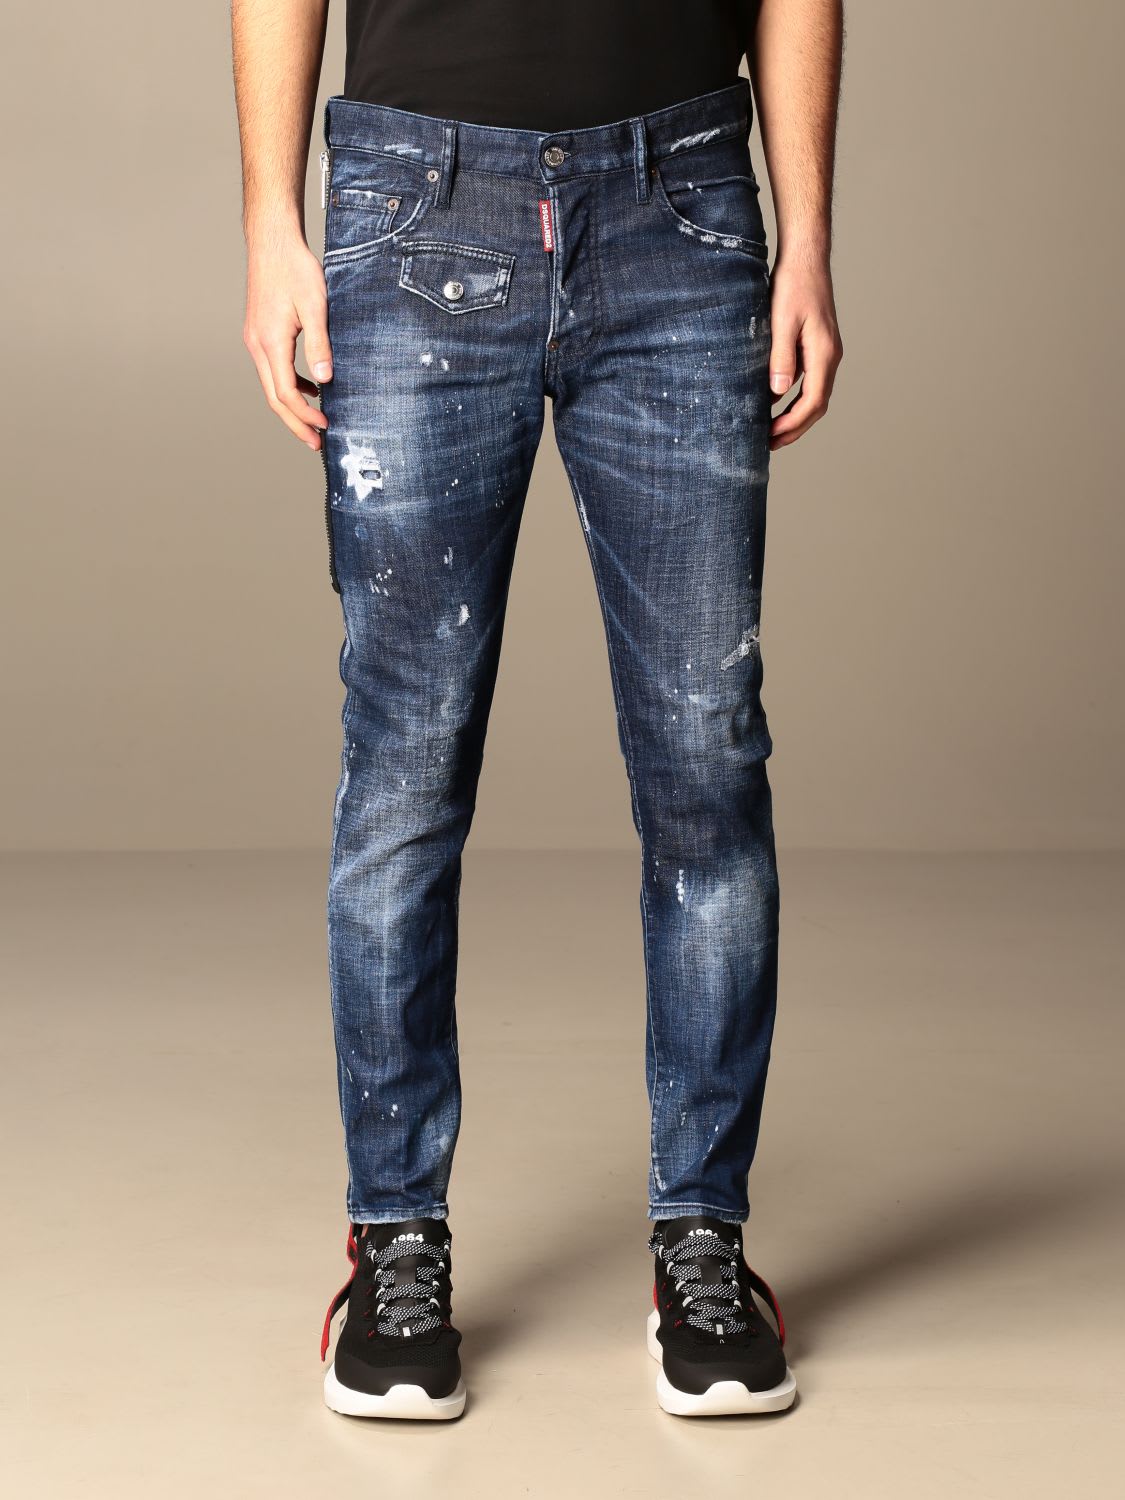 Dsquared2 Jeans Dsquared2 5-pocket Skater Jeans In Used Denim With Rips And Zip